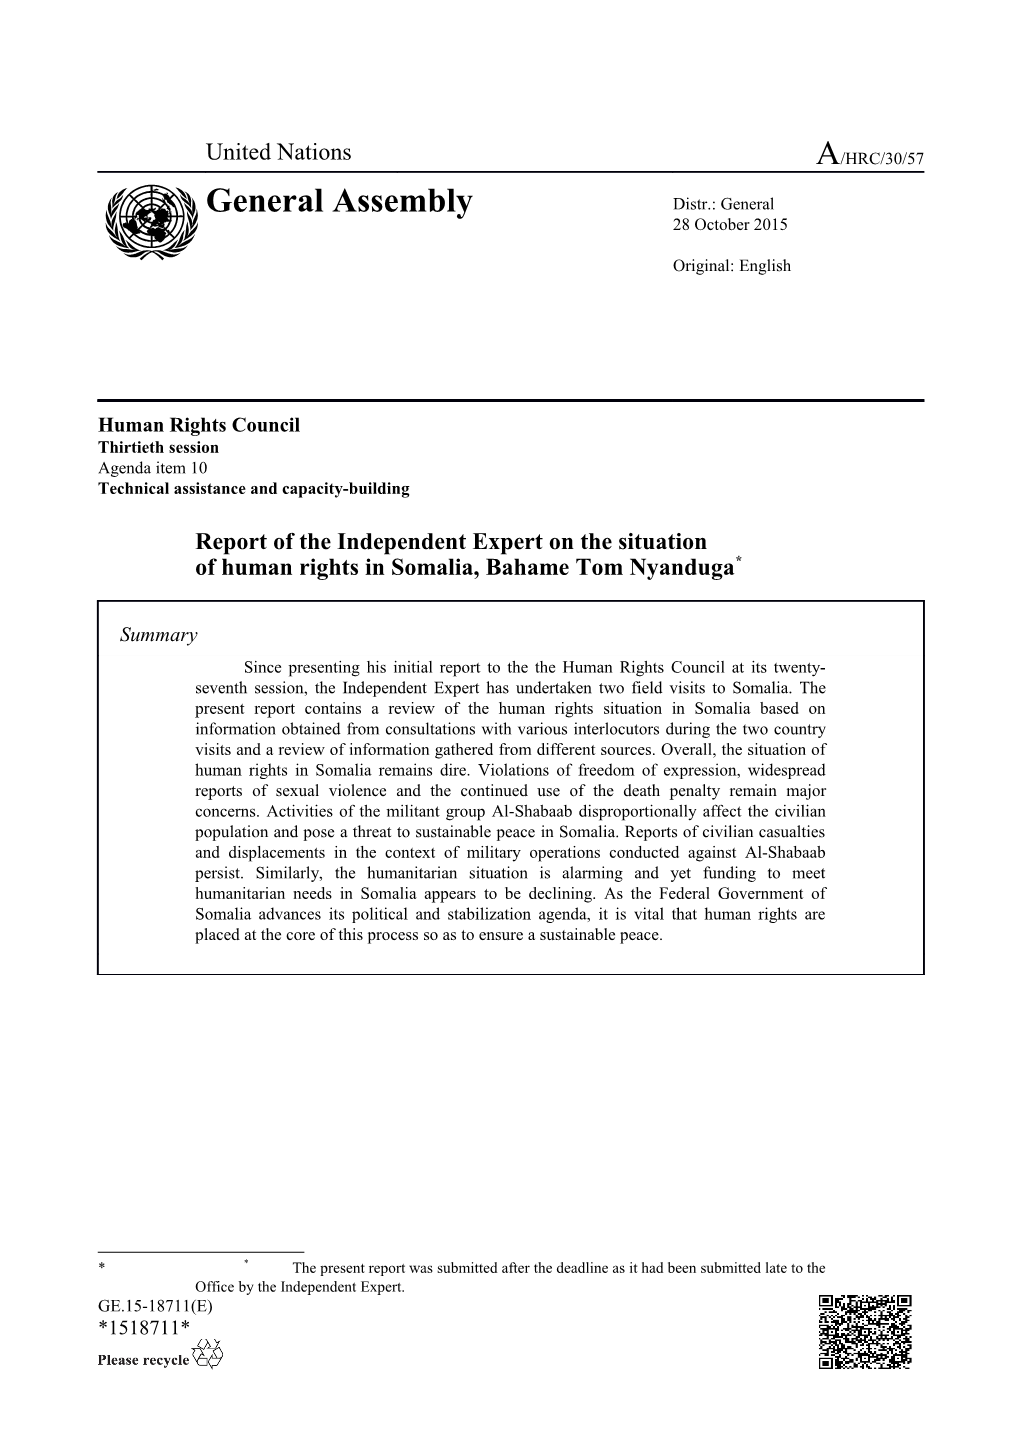 Report of the Independent Expert on the Situation of Human Rights in Somalia, Bahame Nyanduga